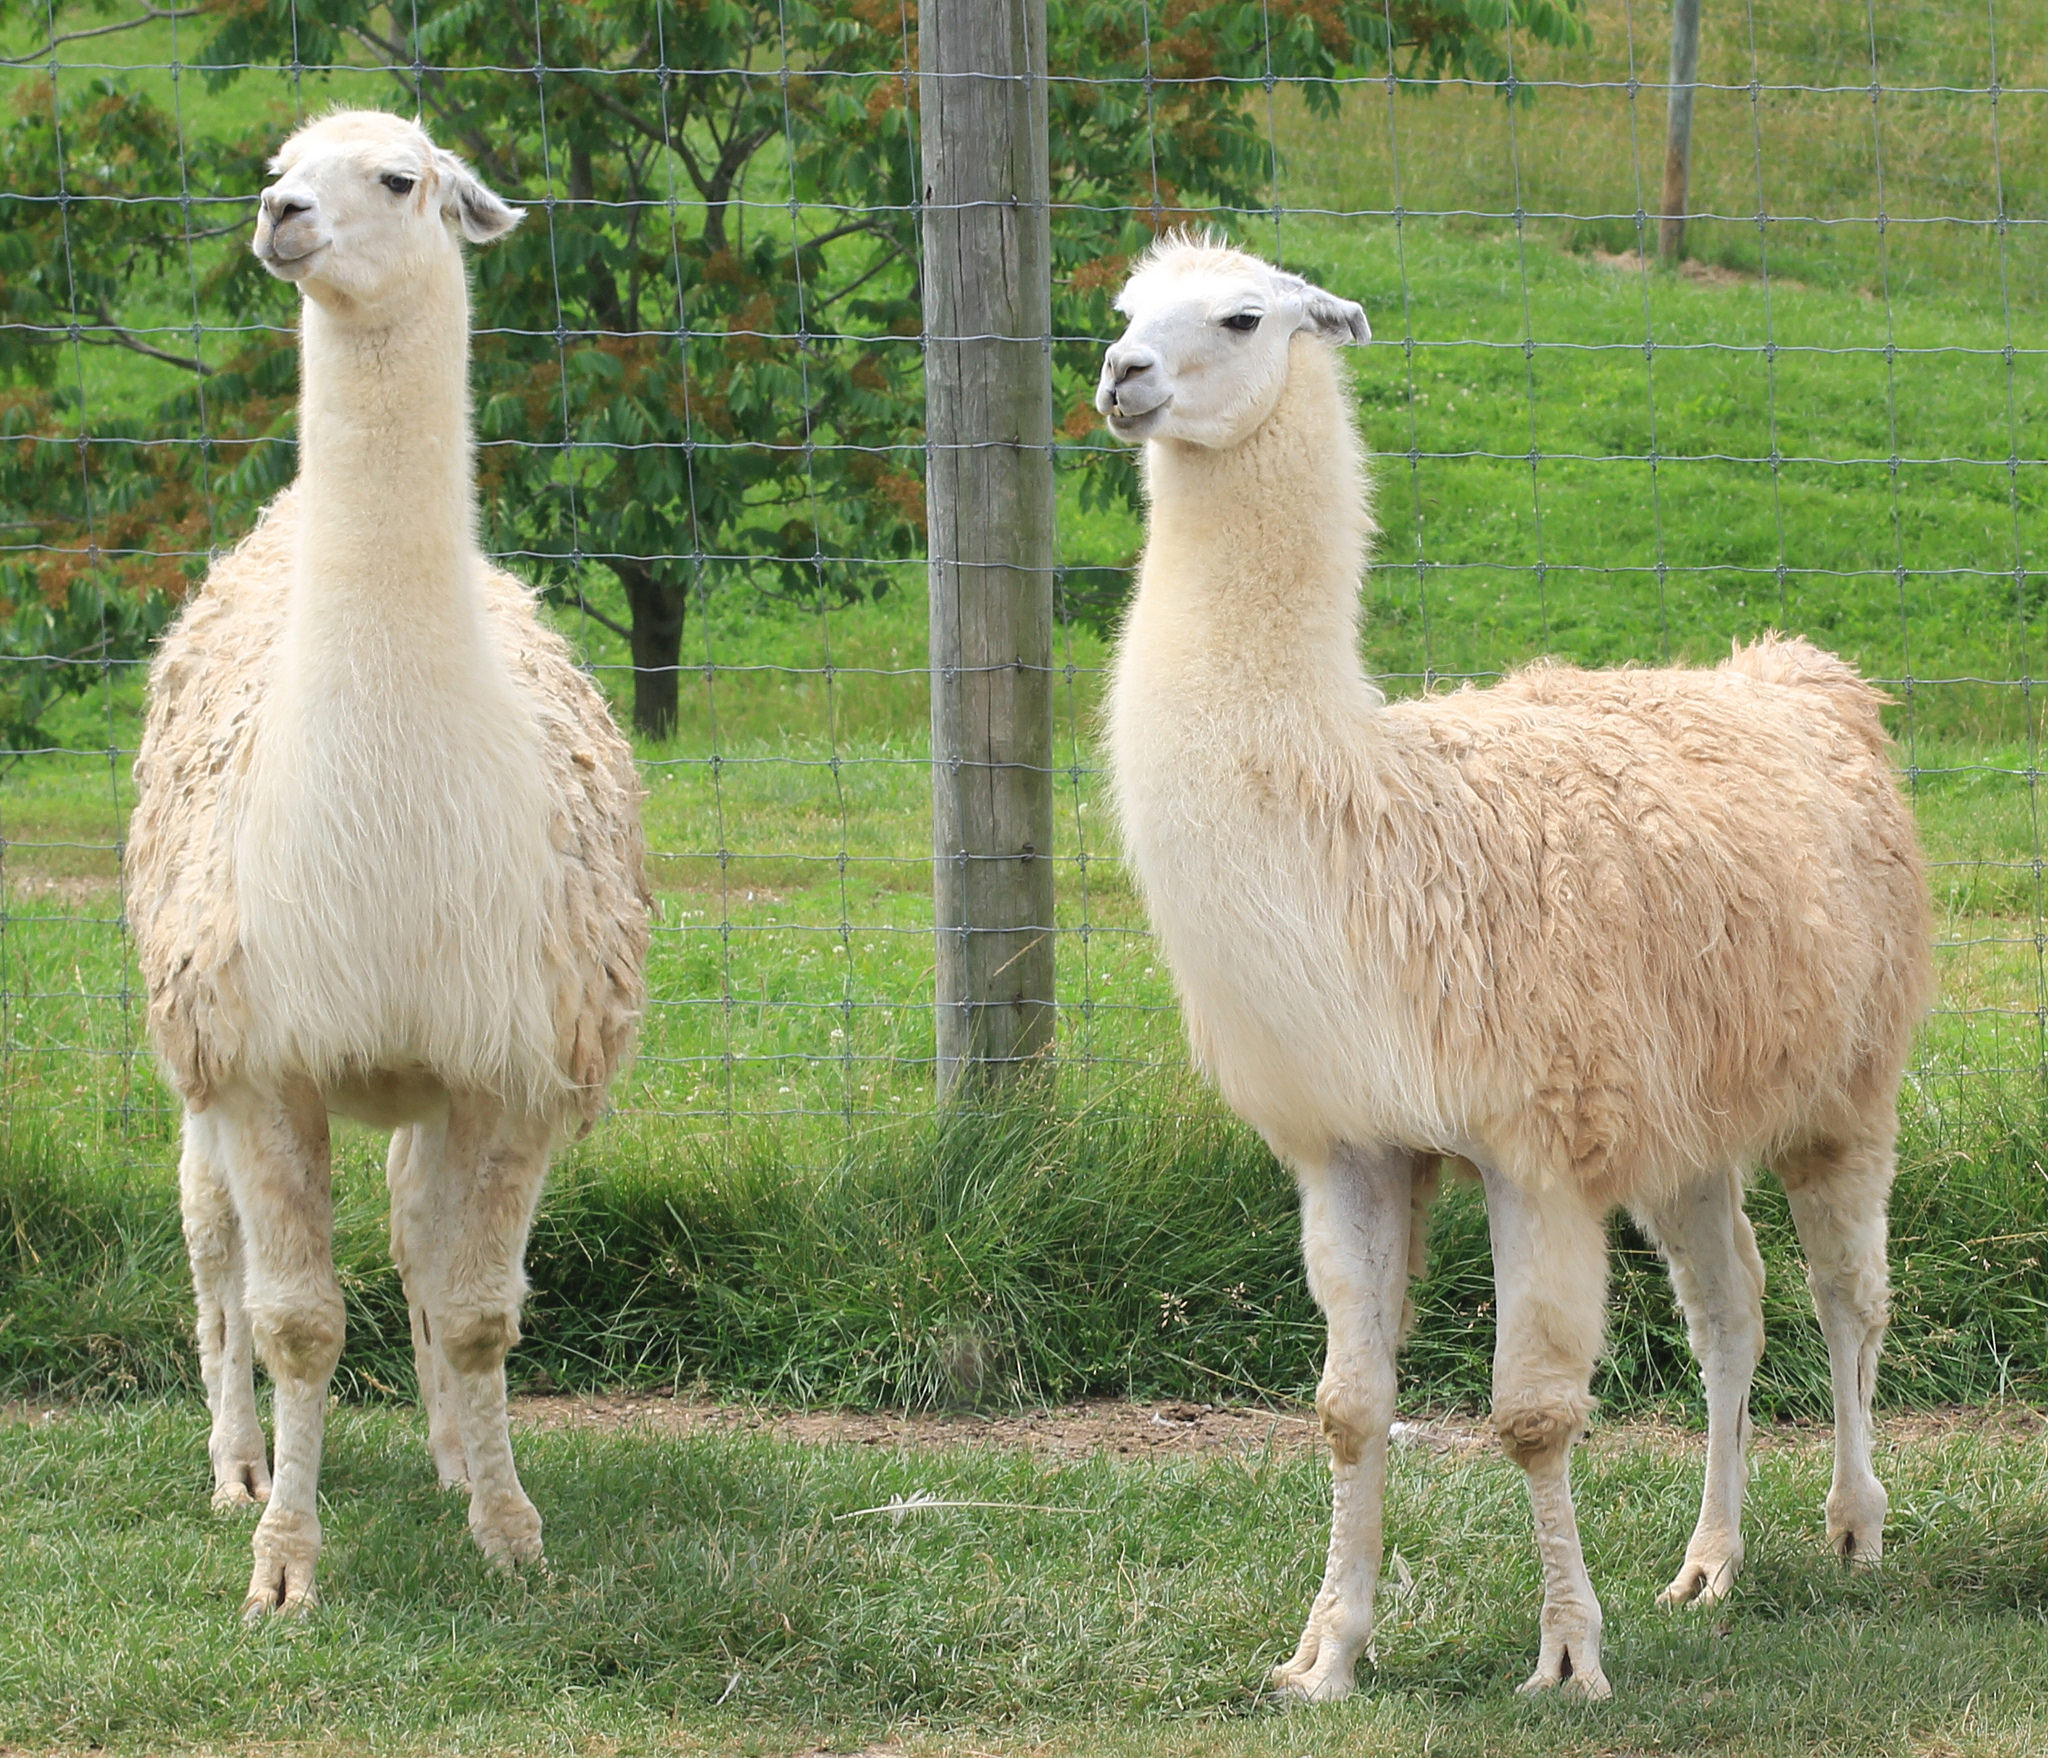 Llama - Key Facts, Information & Pictures